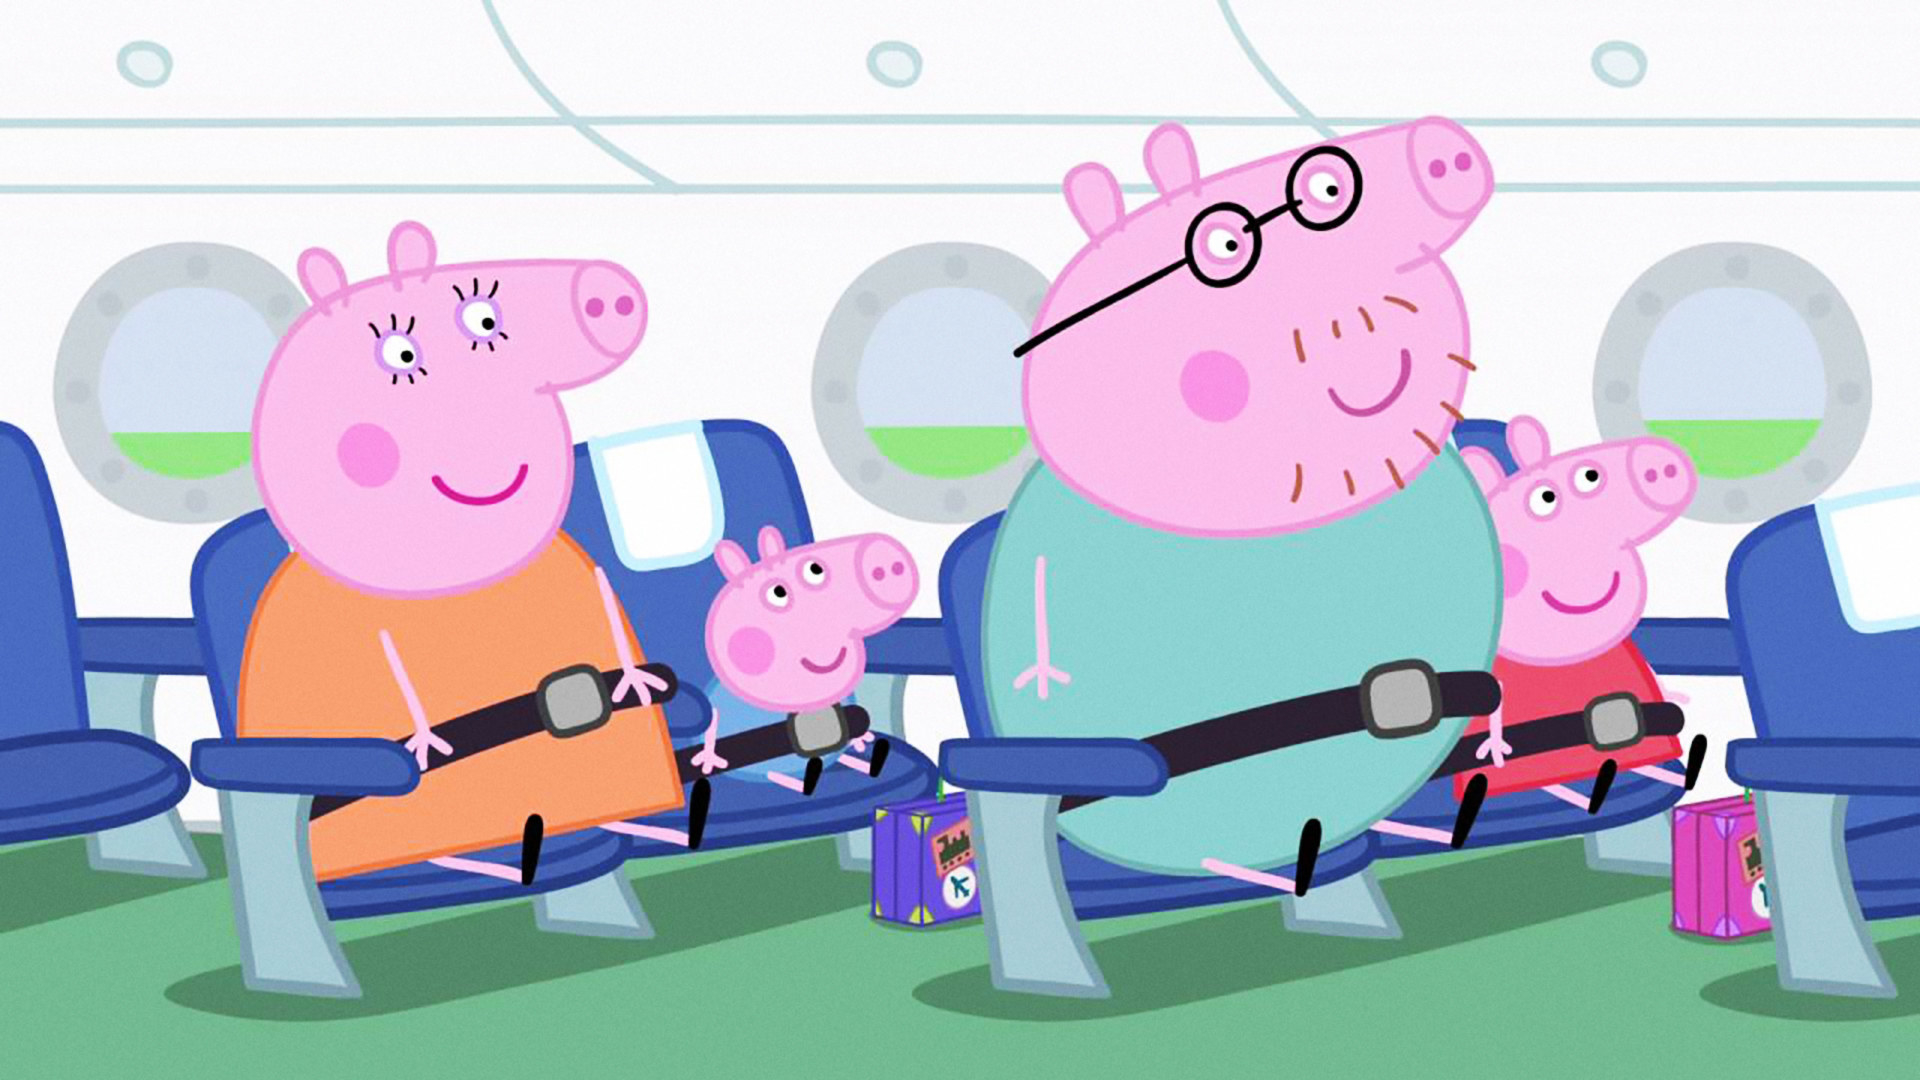 Screen shot from &quot;Peppa Pig&quot;